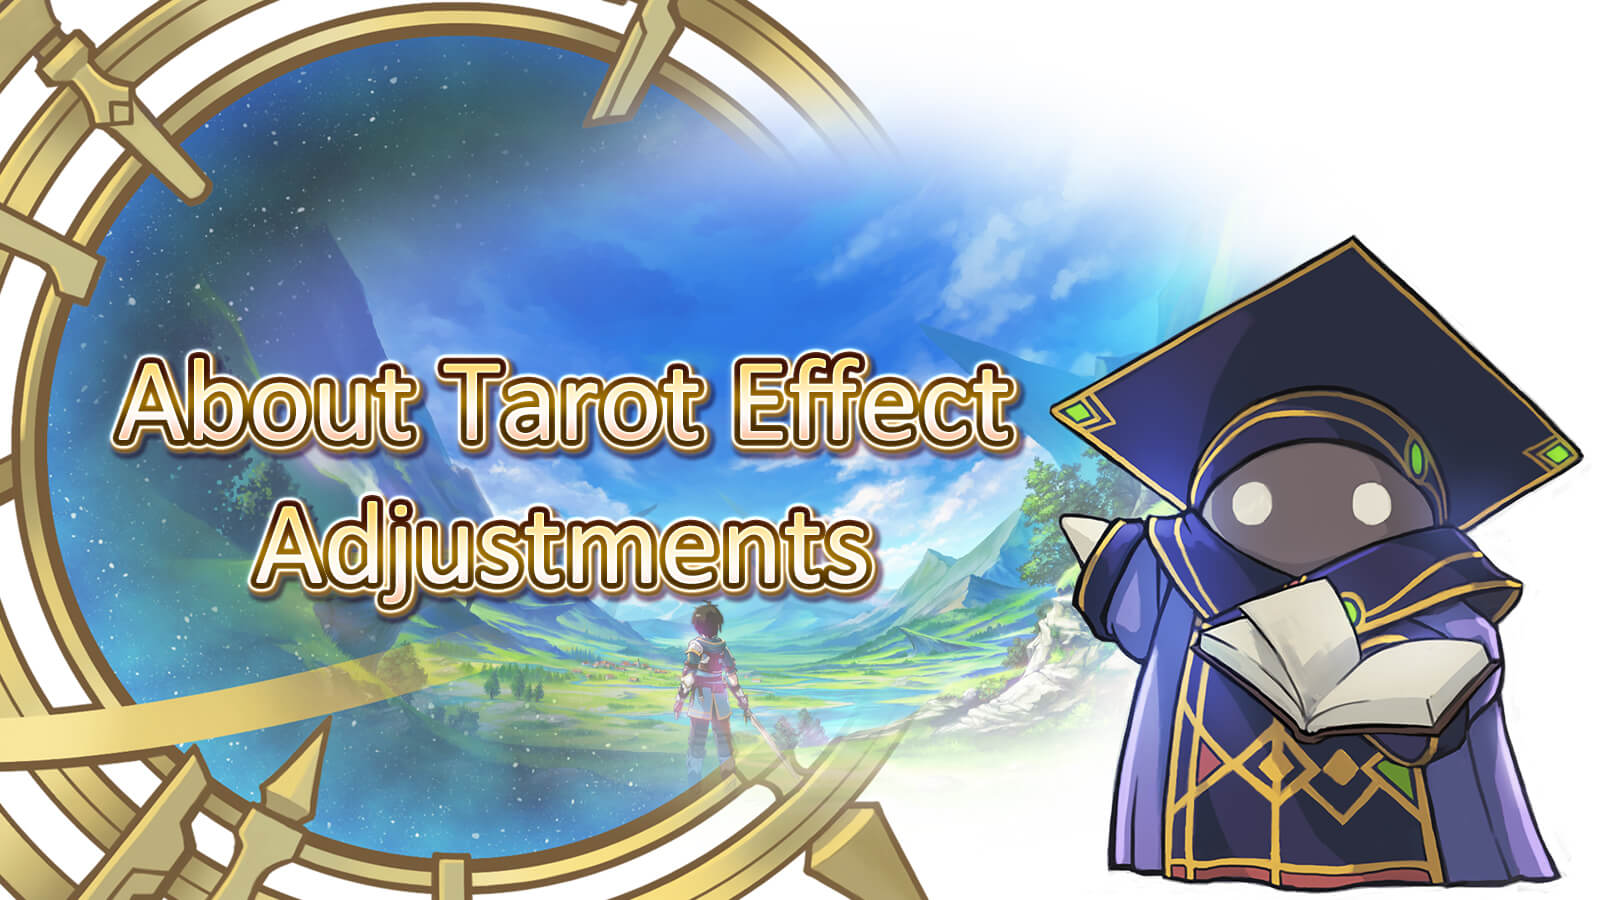 About Tarot Effect Adjustments